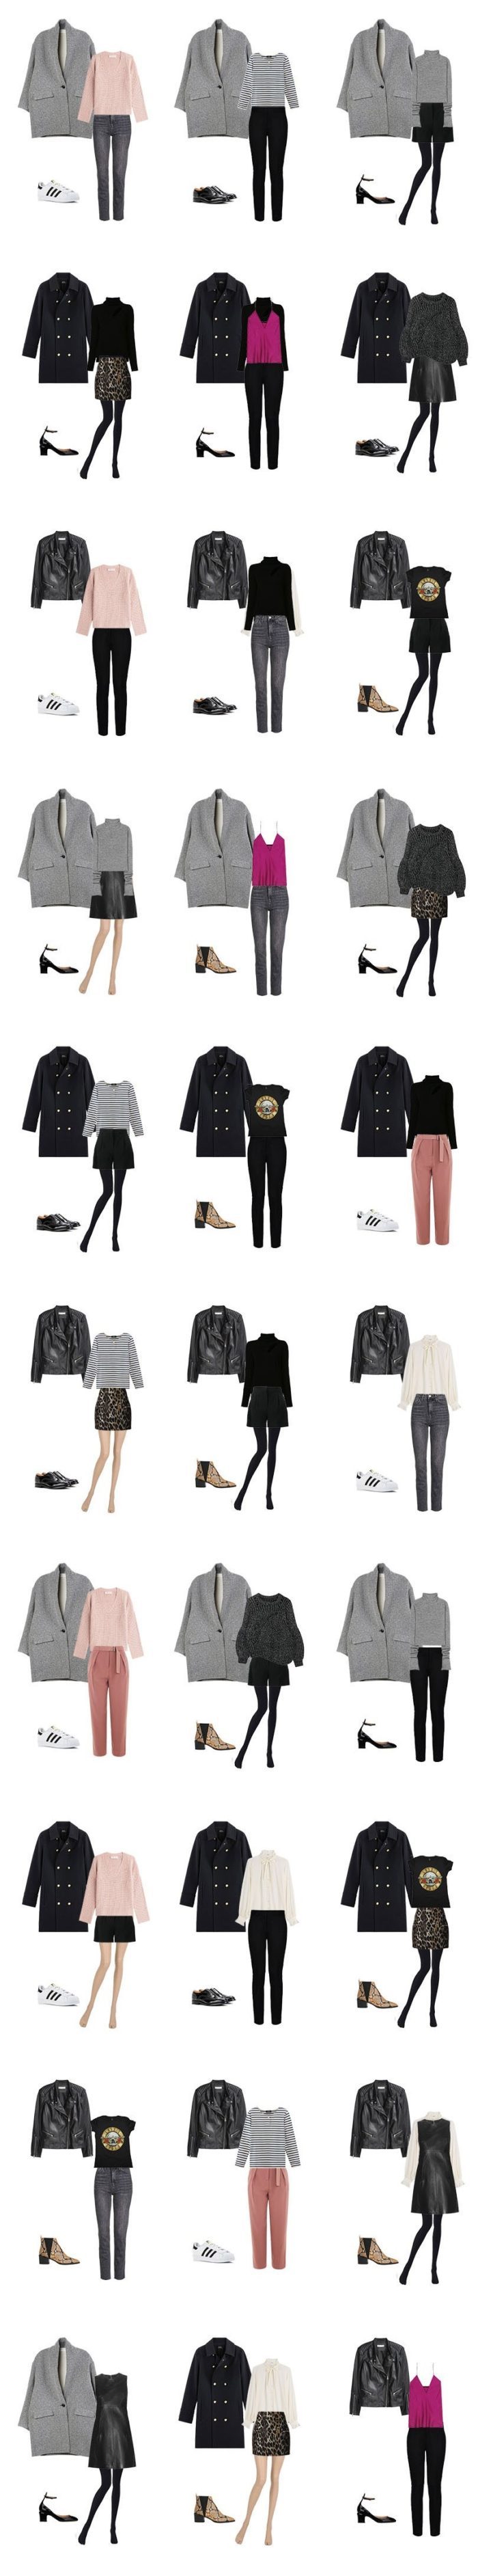 An example of images created from 20 things of a capsule wardrobe